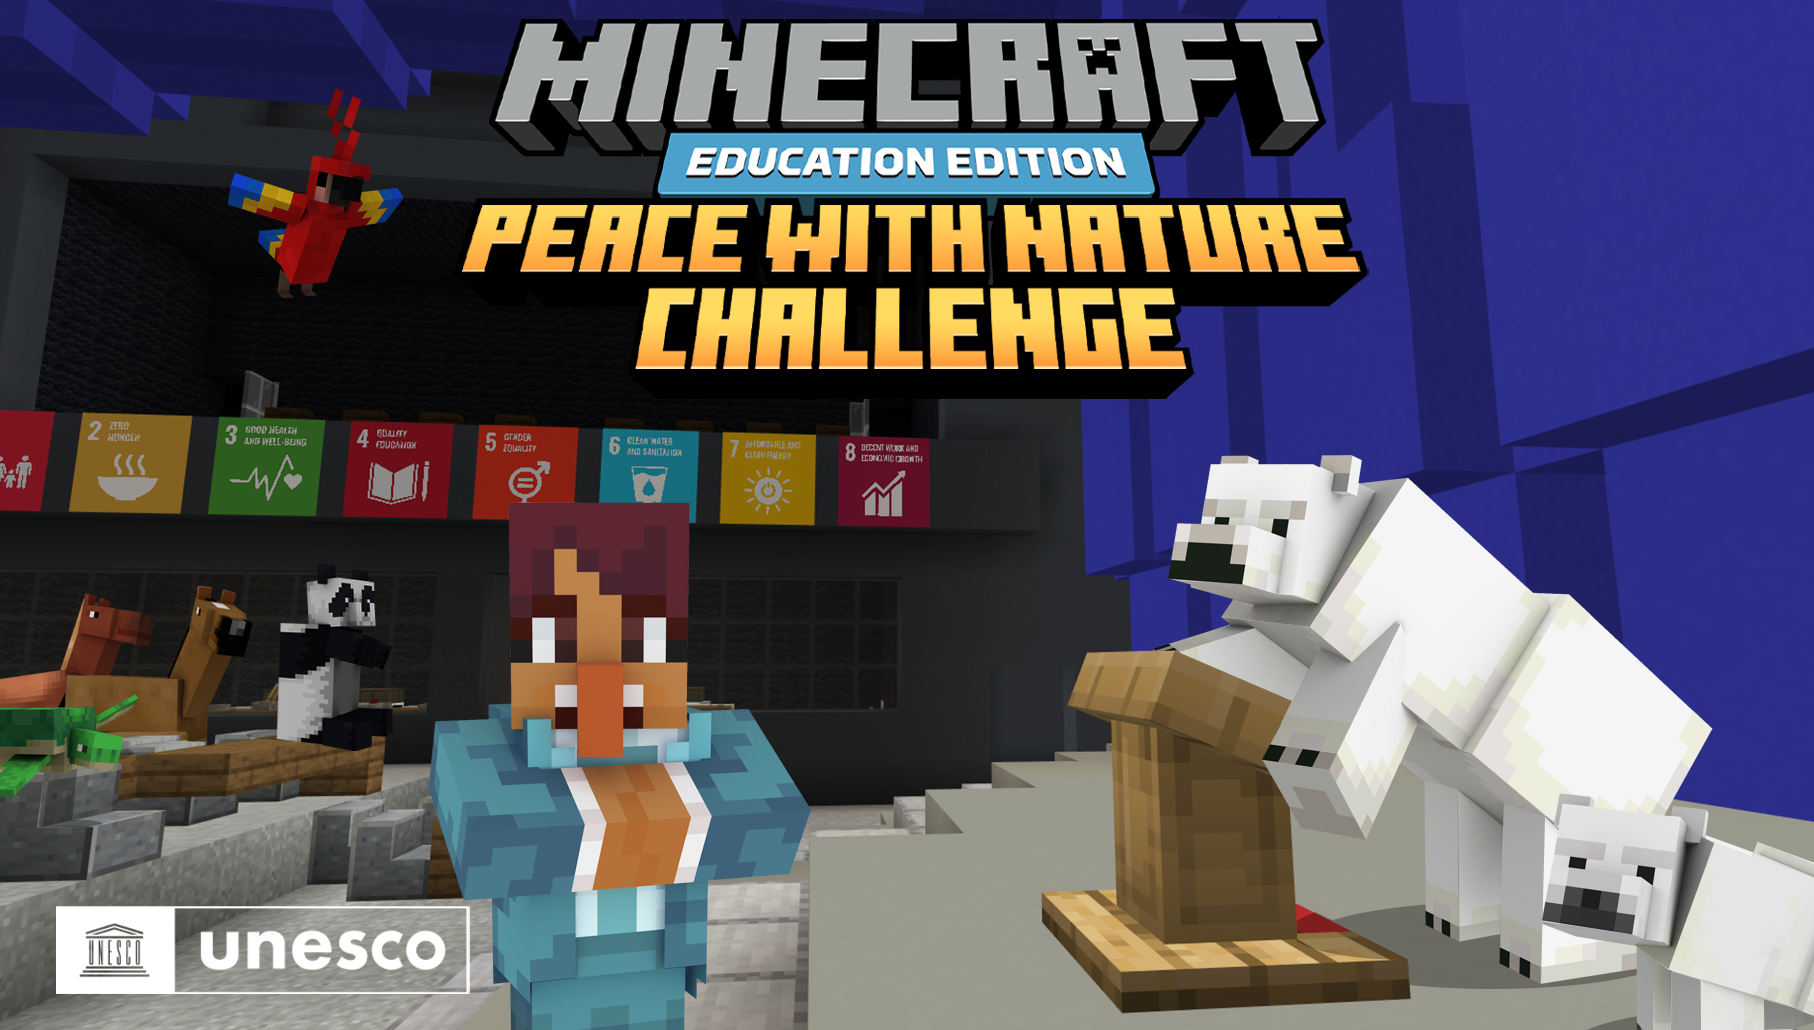 Global Build Challenge 21 Peace With Nature Minecraft Education Edition